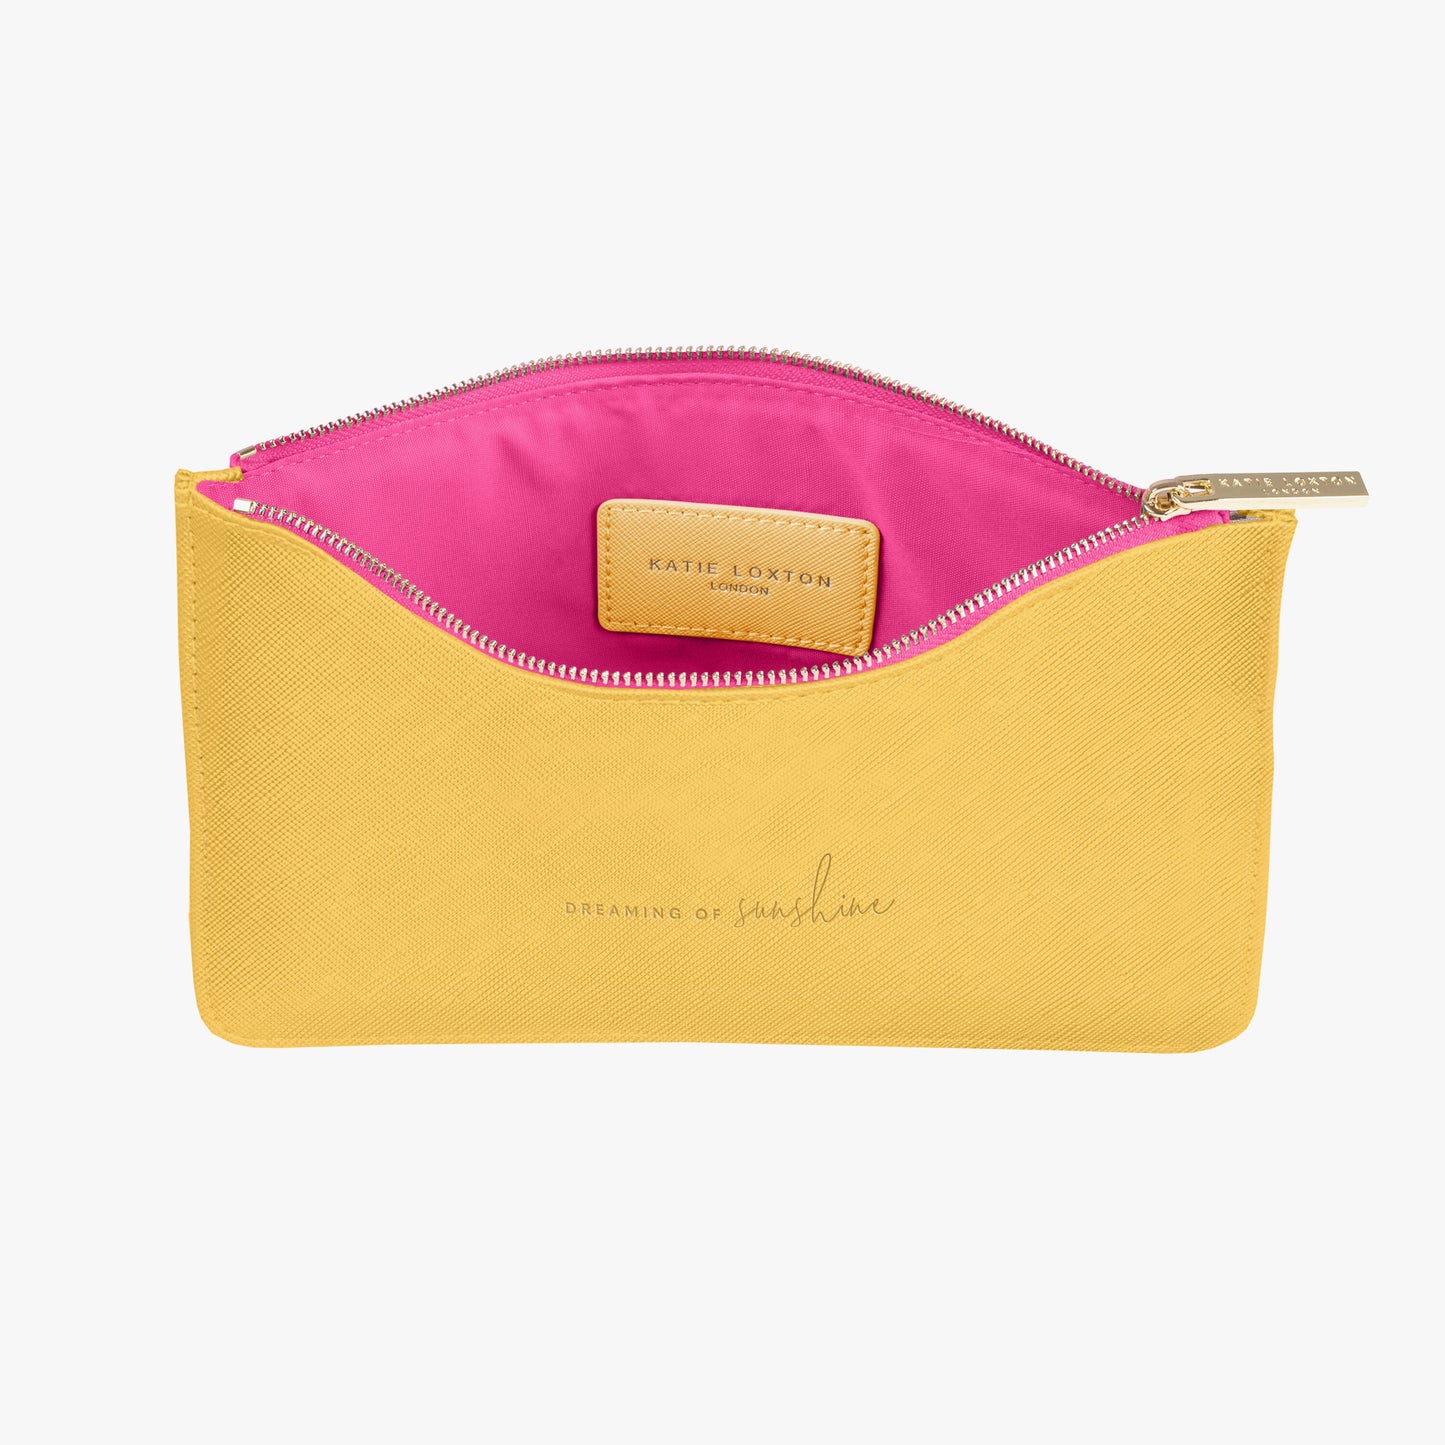 Perfect Pouch - Dreaming of Sunshine